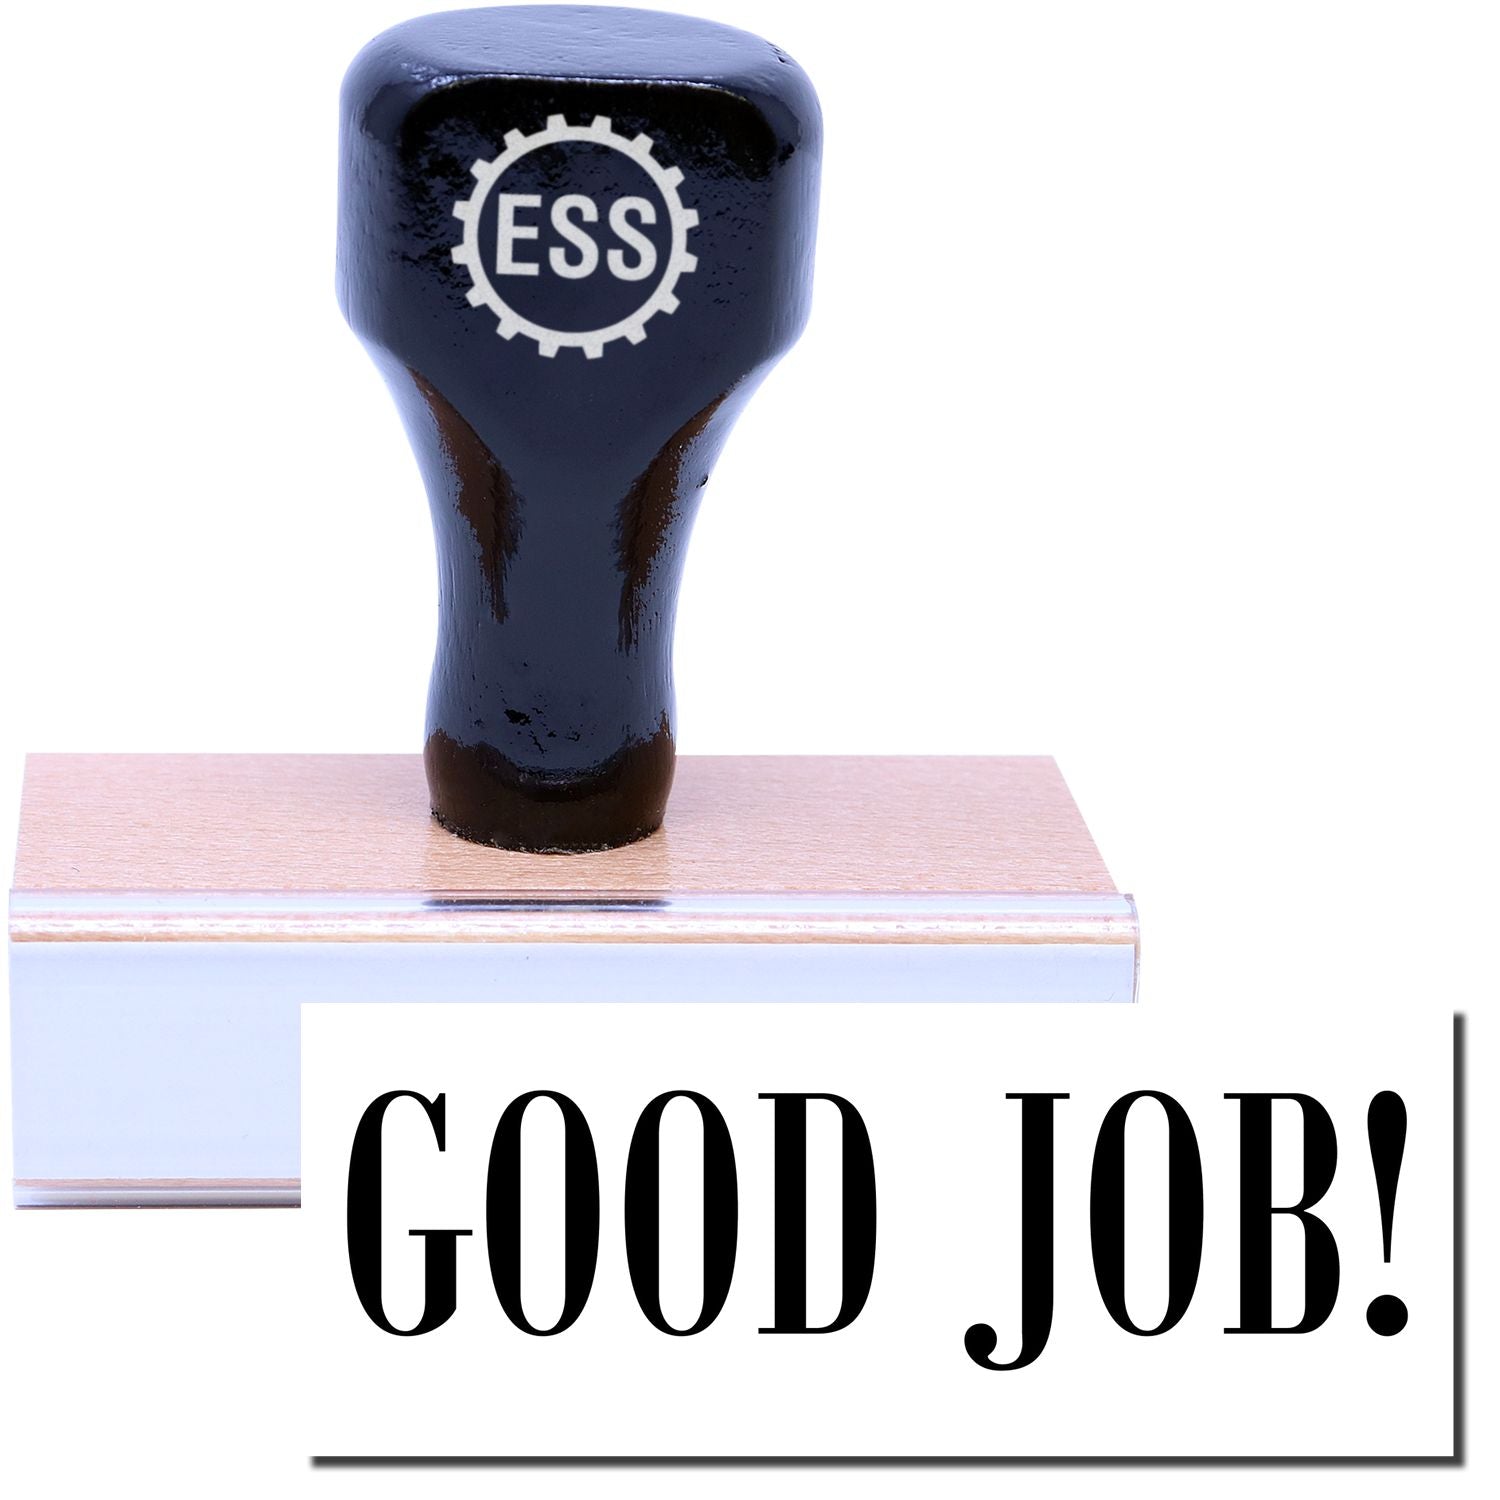 A stock office rubber stamp with a stamped image showing how the text "GOOD JOB!" is displayed after stamping.